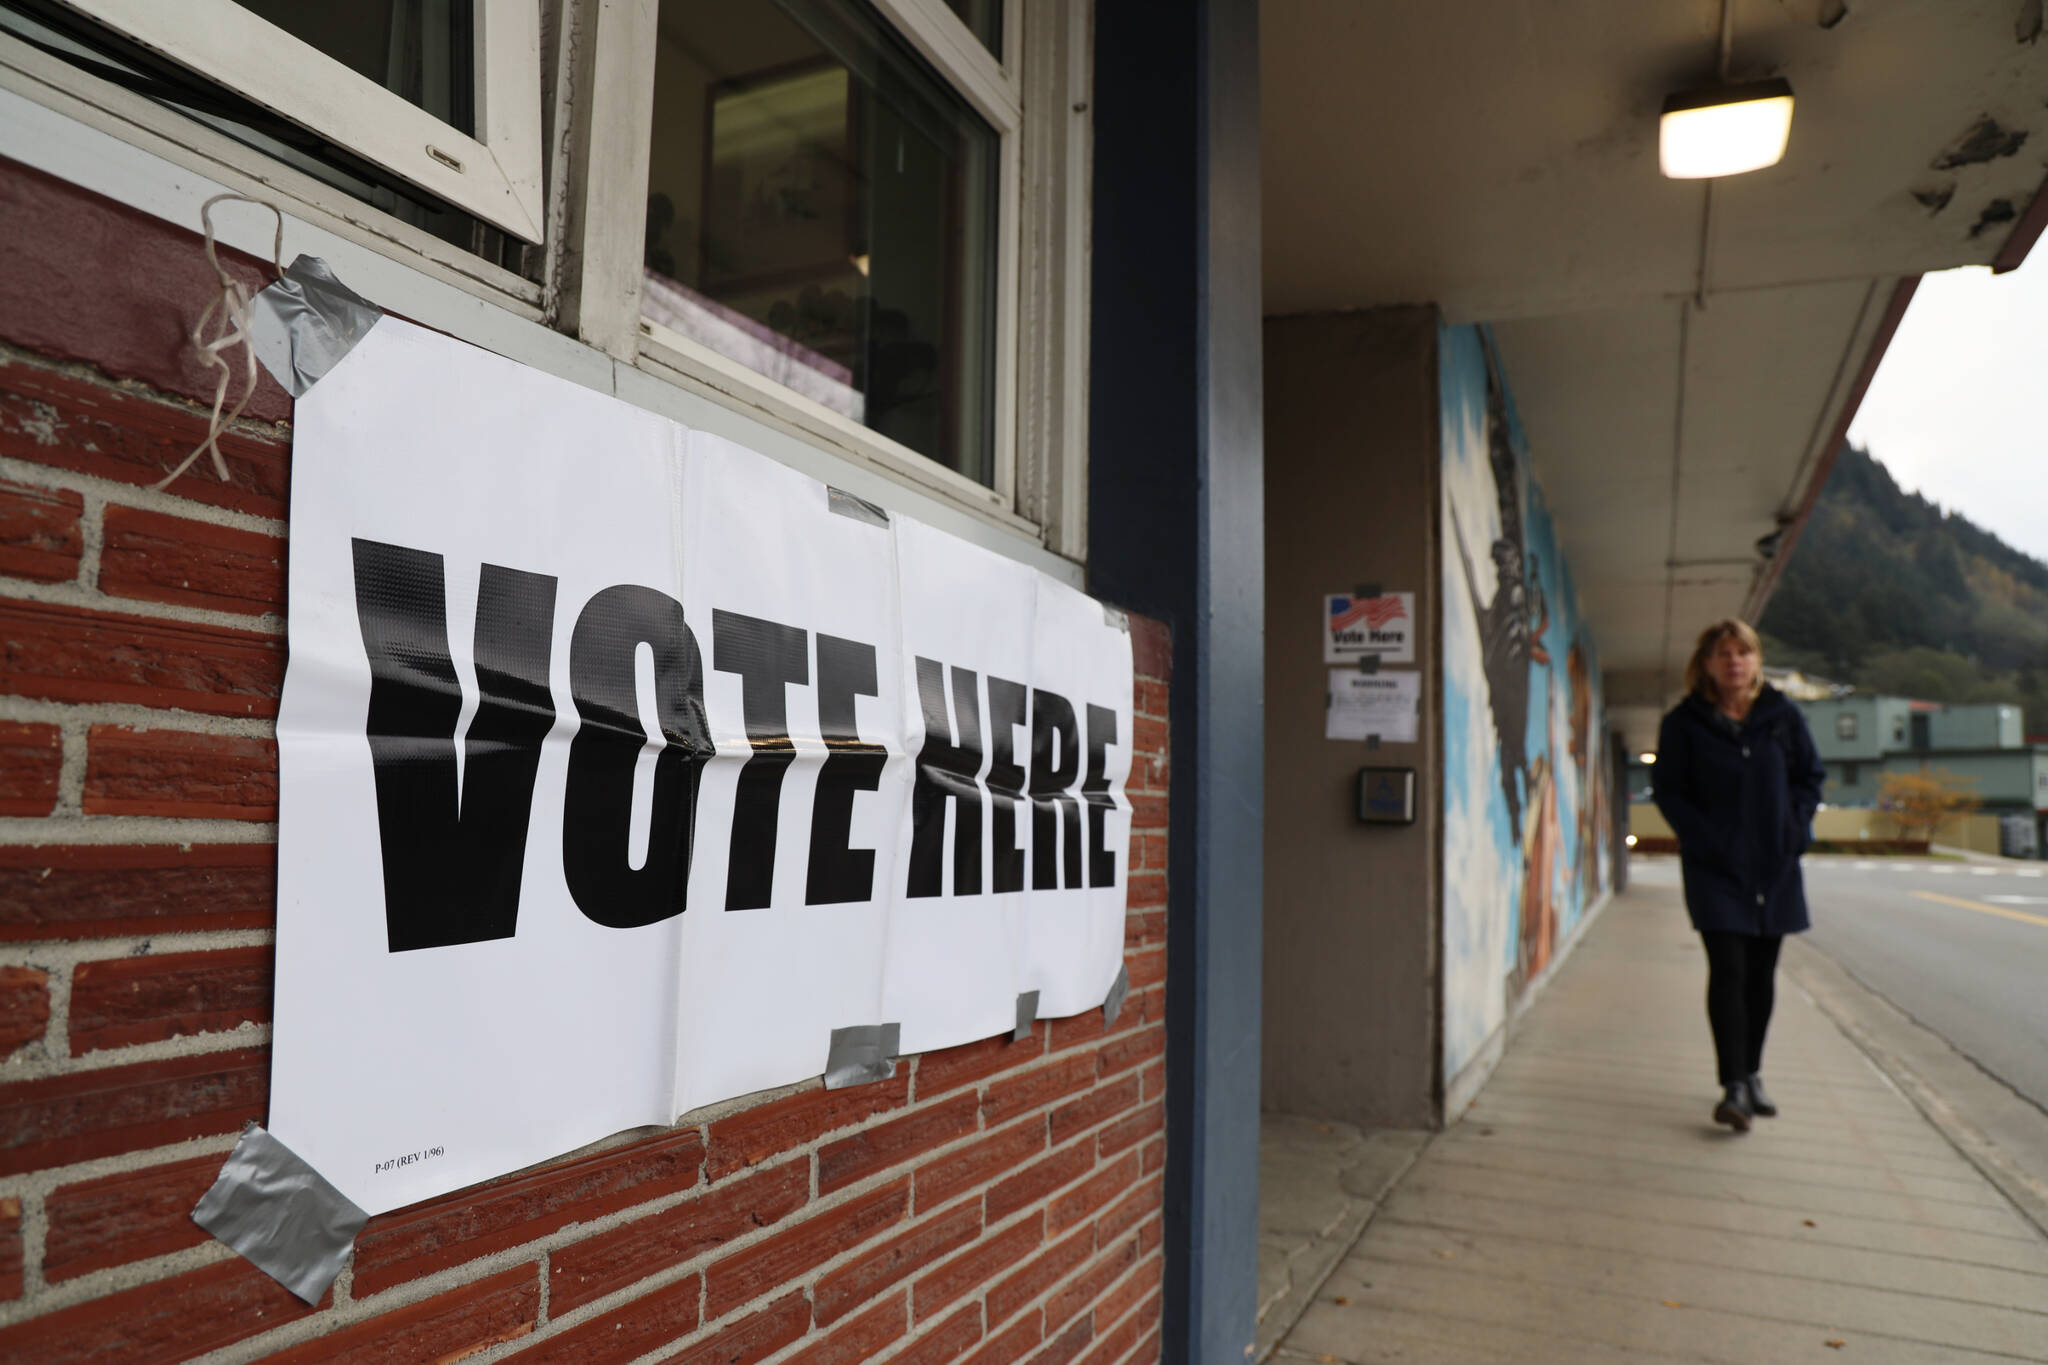 Clarise Larson / Juneau Empire 
A sign to guide voters to the City Hall Assembly Chambers voter center hangs duct taped to the outside wall of the building on Election day Tuesday morning. Tuesday was the last day for residents to cast their votes before polls close at 8 p.m.